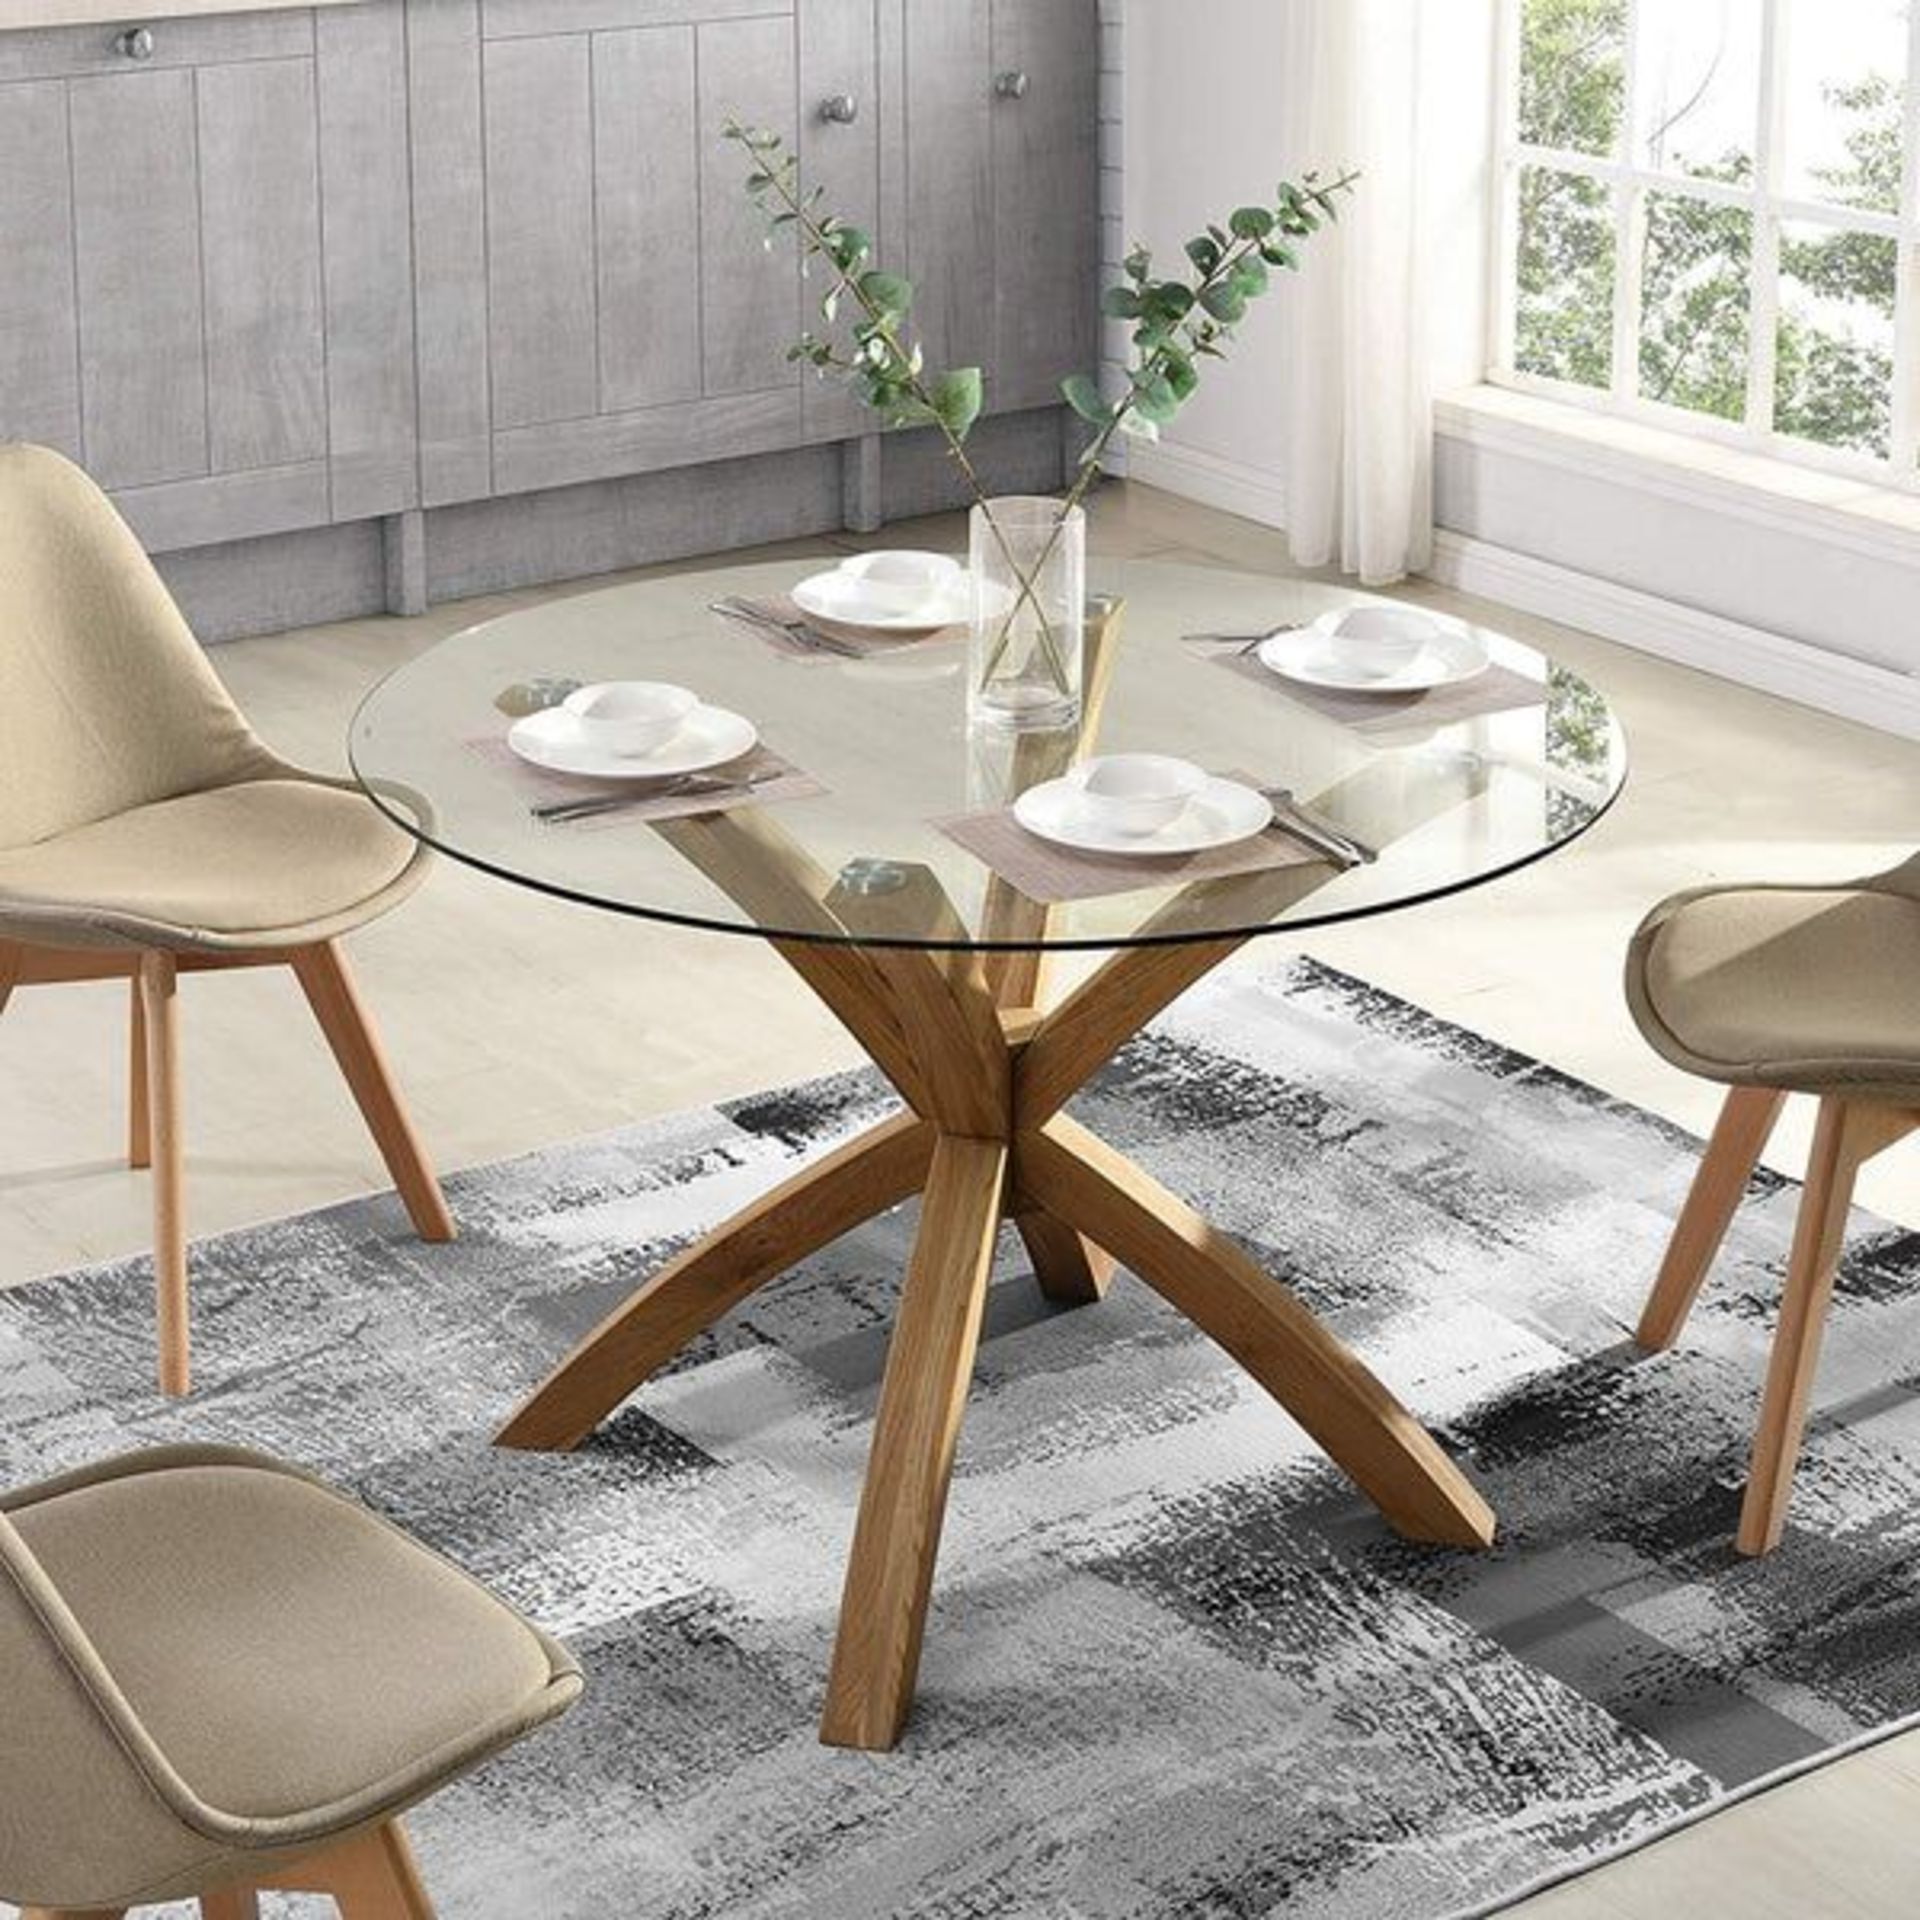 Lugano 110cm Round Glass Top Solid Oak Legs Dining Table. - ER20. RRP £439.99. Featuring four subtly - Image 2 of 2